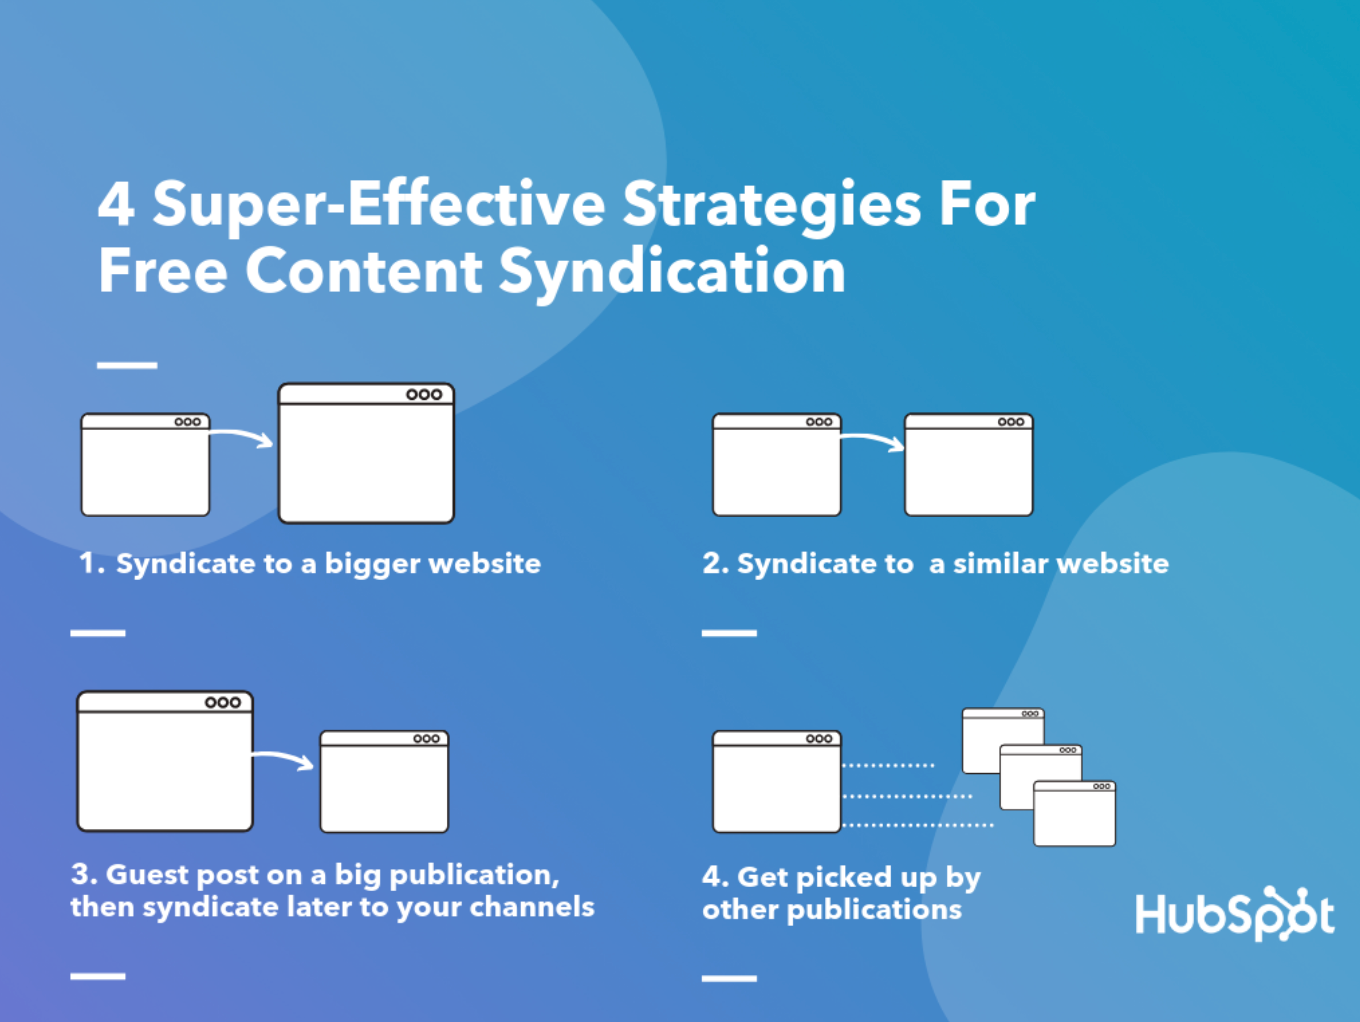 HubSpot's 4 Content Syndication Strategies